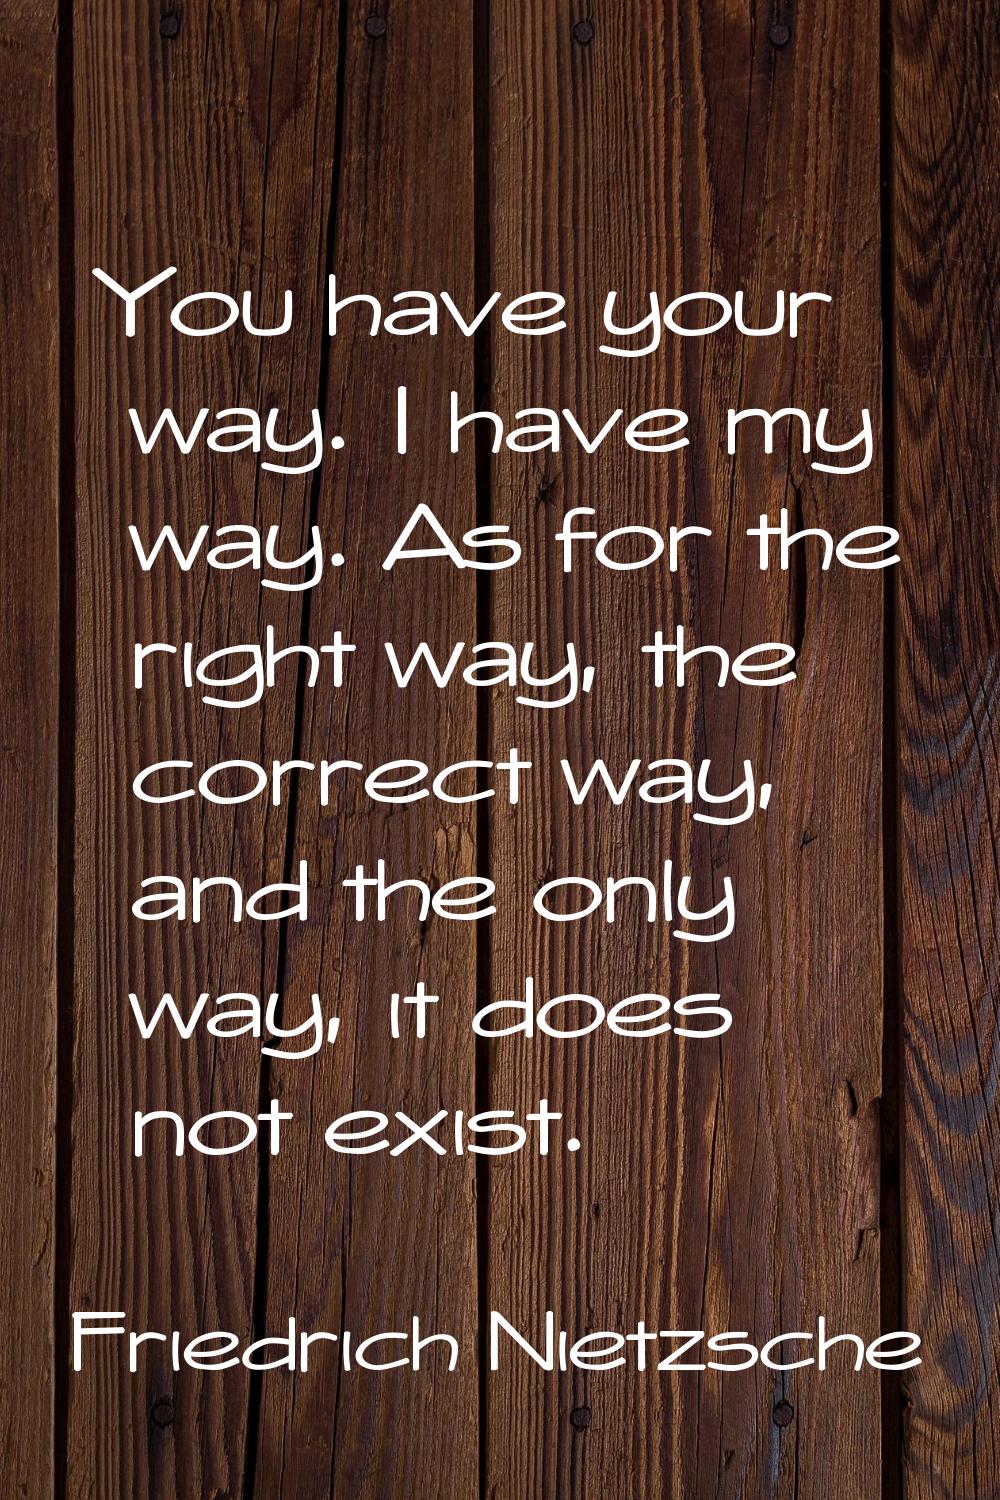 You have your way. I have my way. As for the right way, the correct way, and the only way, it does 